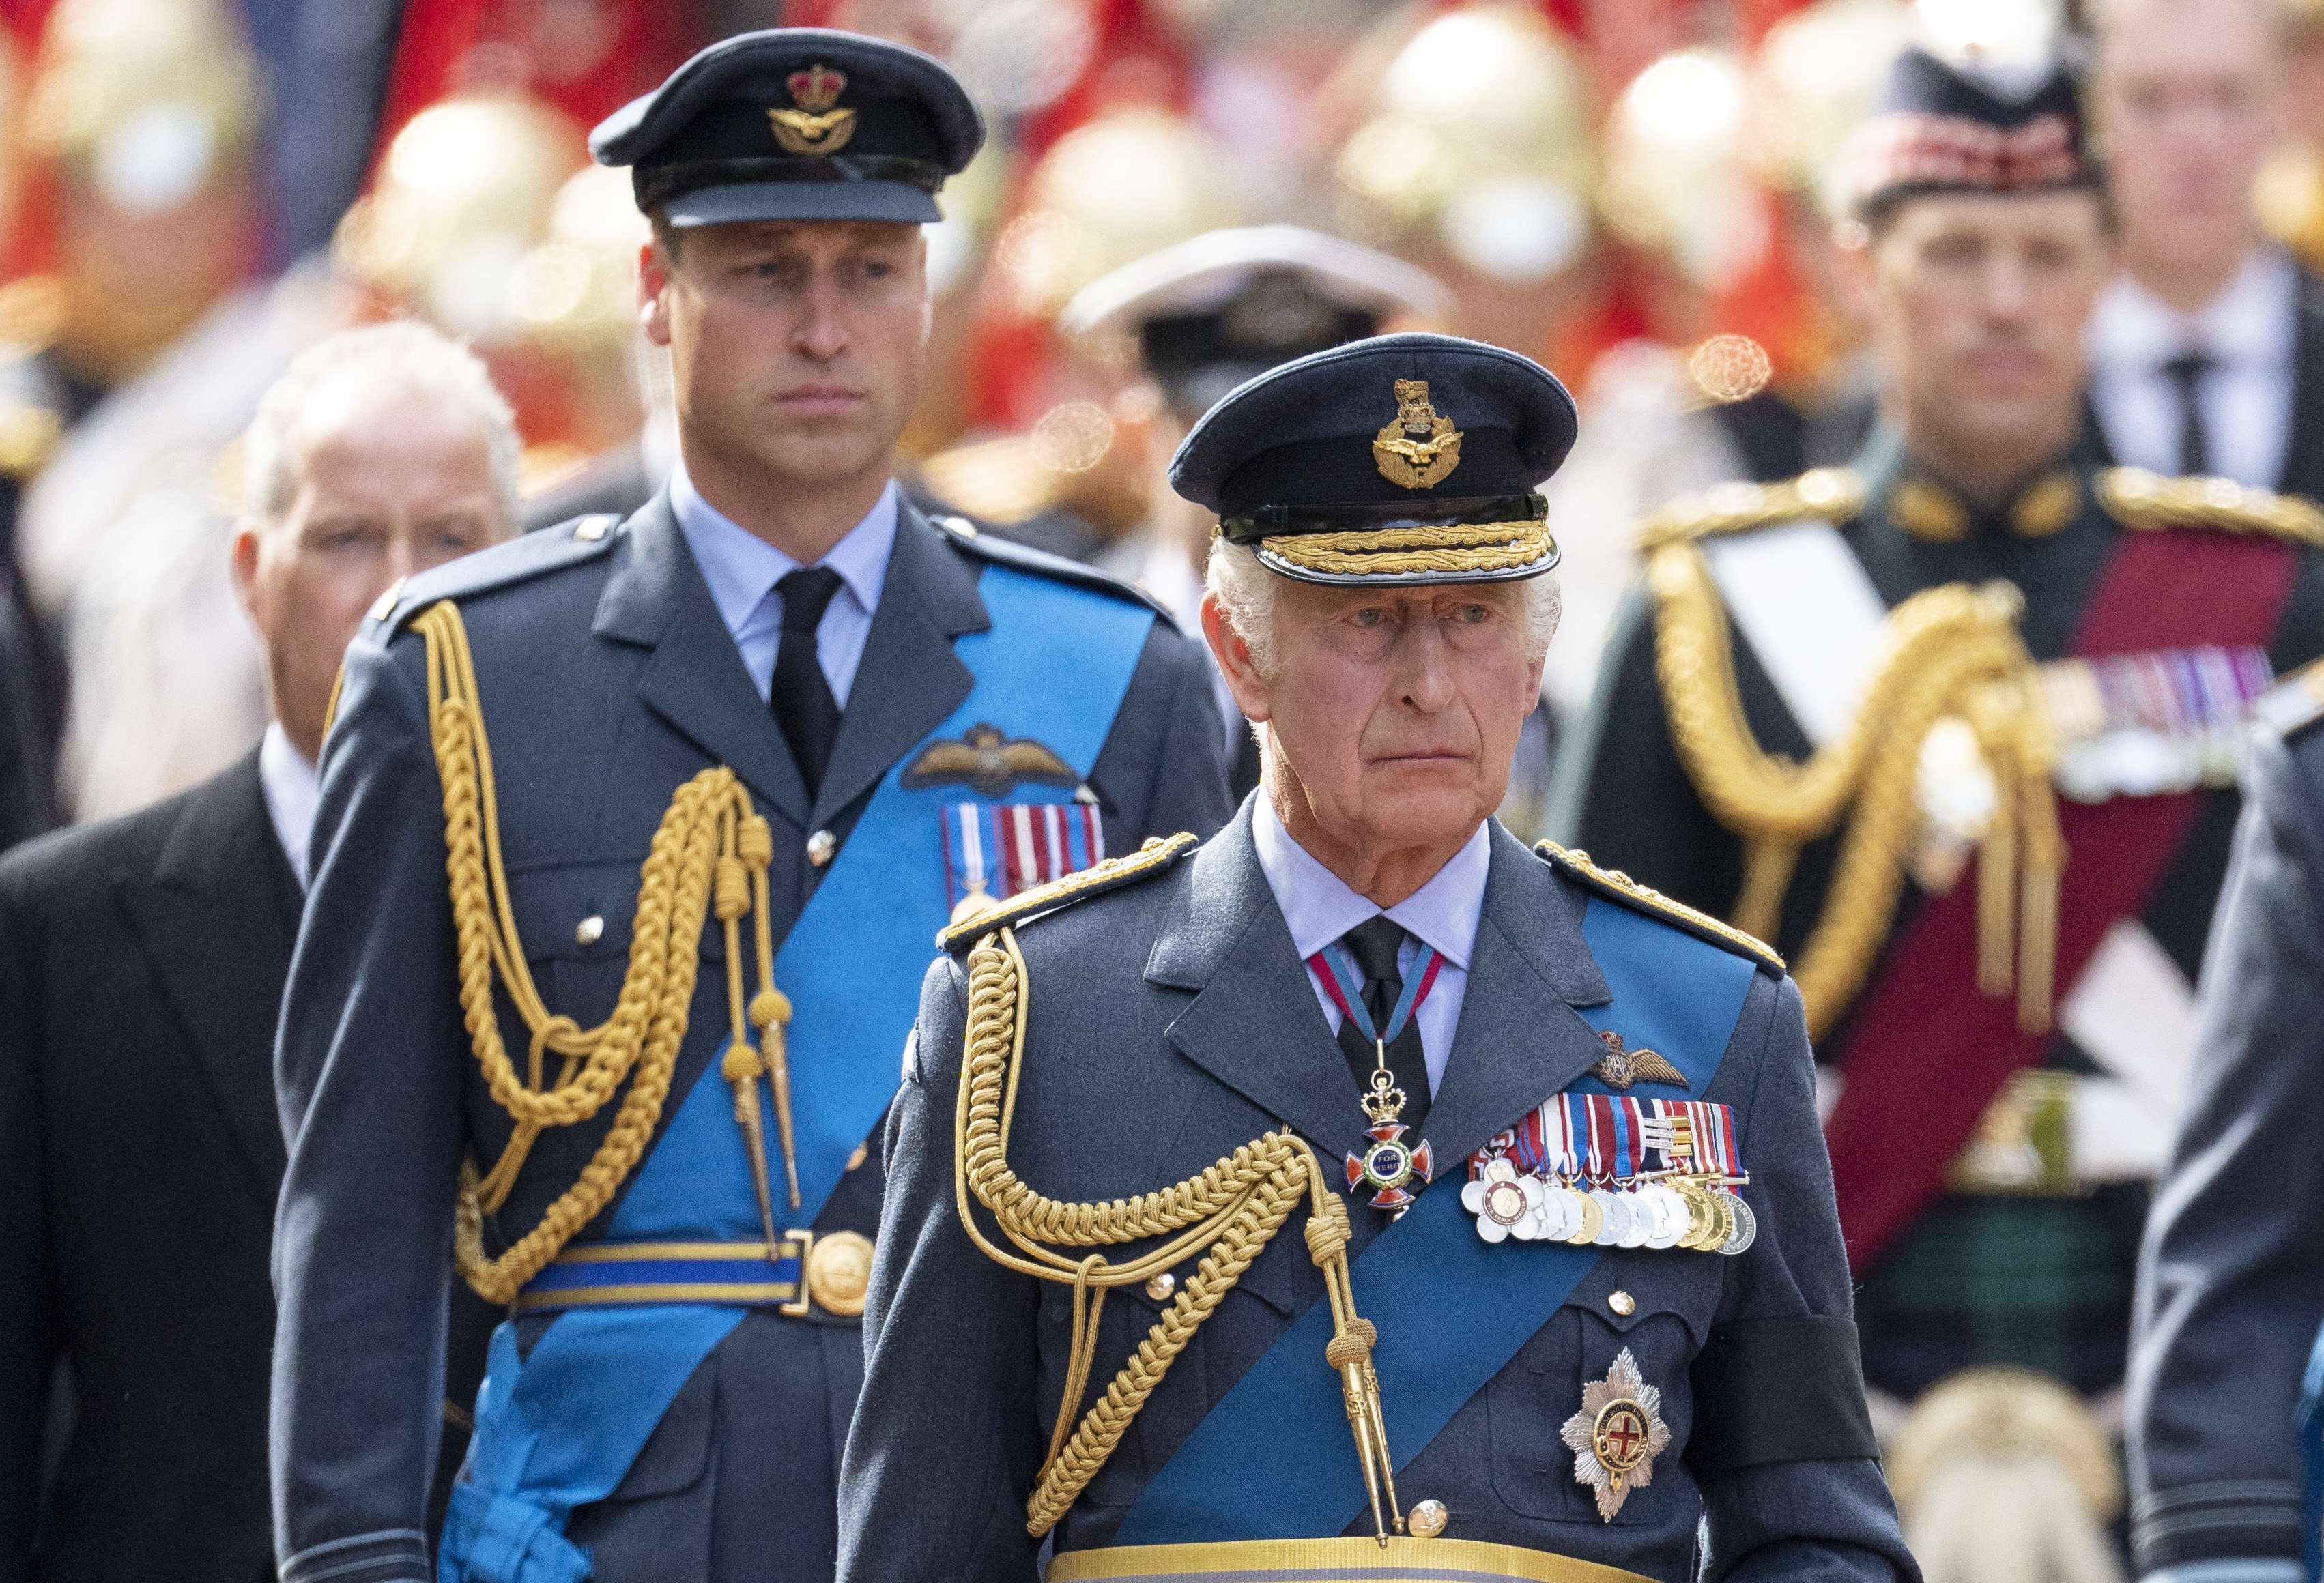 <p>King Charles III and <a href="https://www.wonderwall.com/celebrity/profiles/overview/prince-william-482.article">Prince William</a> walked behind the coffin of Queen Elizabeth II during the procession from Buckingham Palace to Westminster Hall in London for her lying-in state on Sept. 14, 2022.</p>